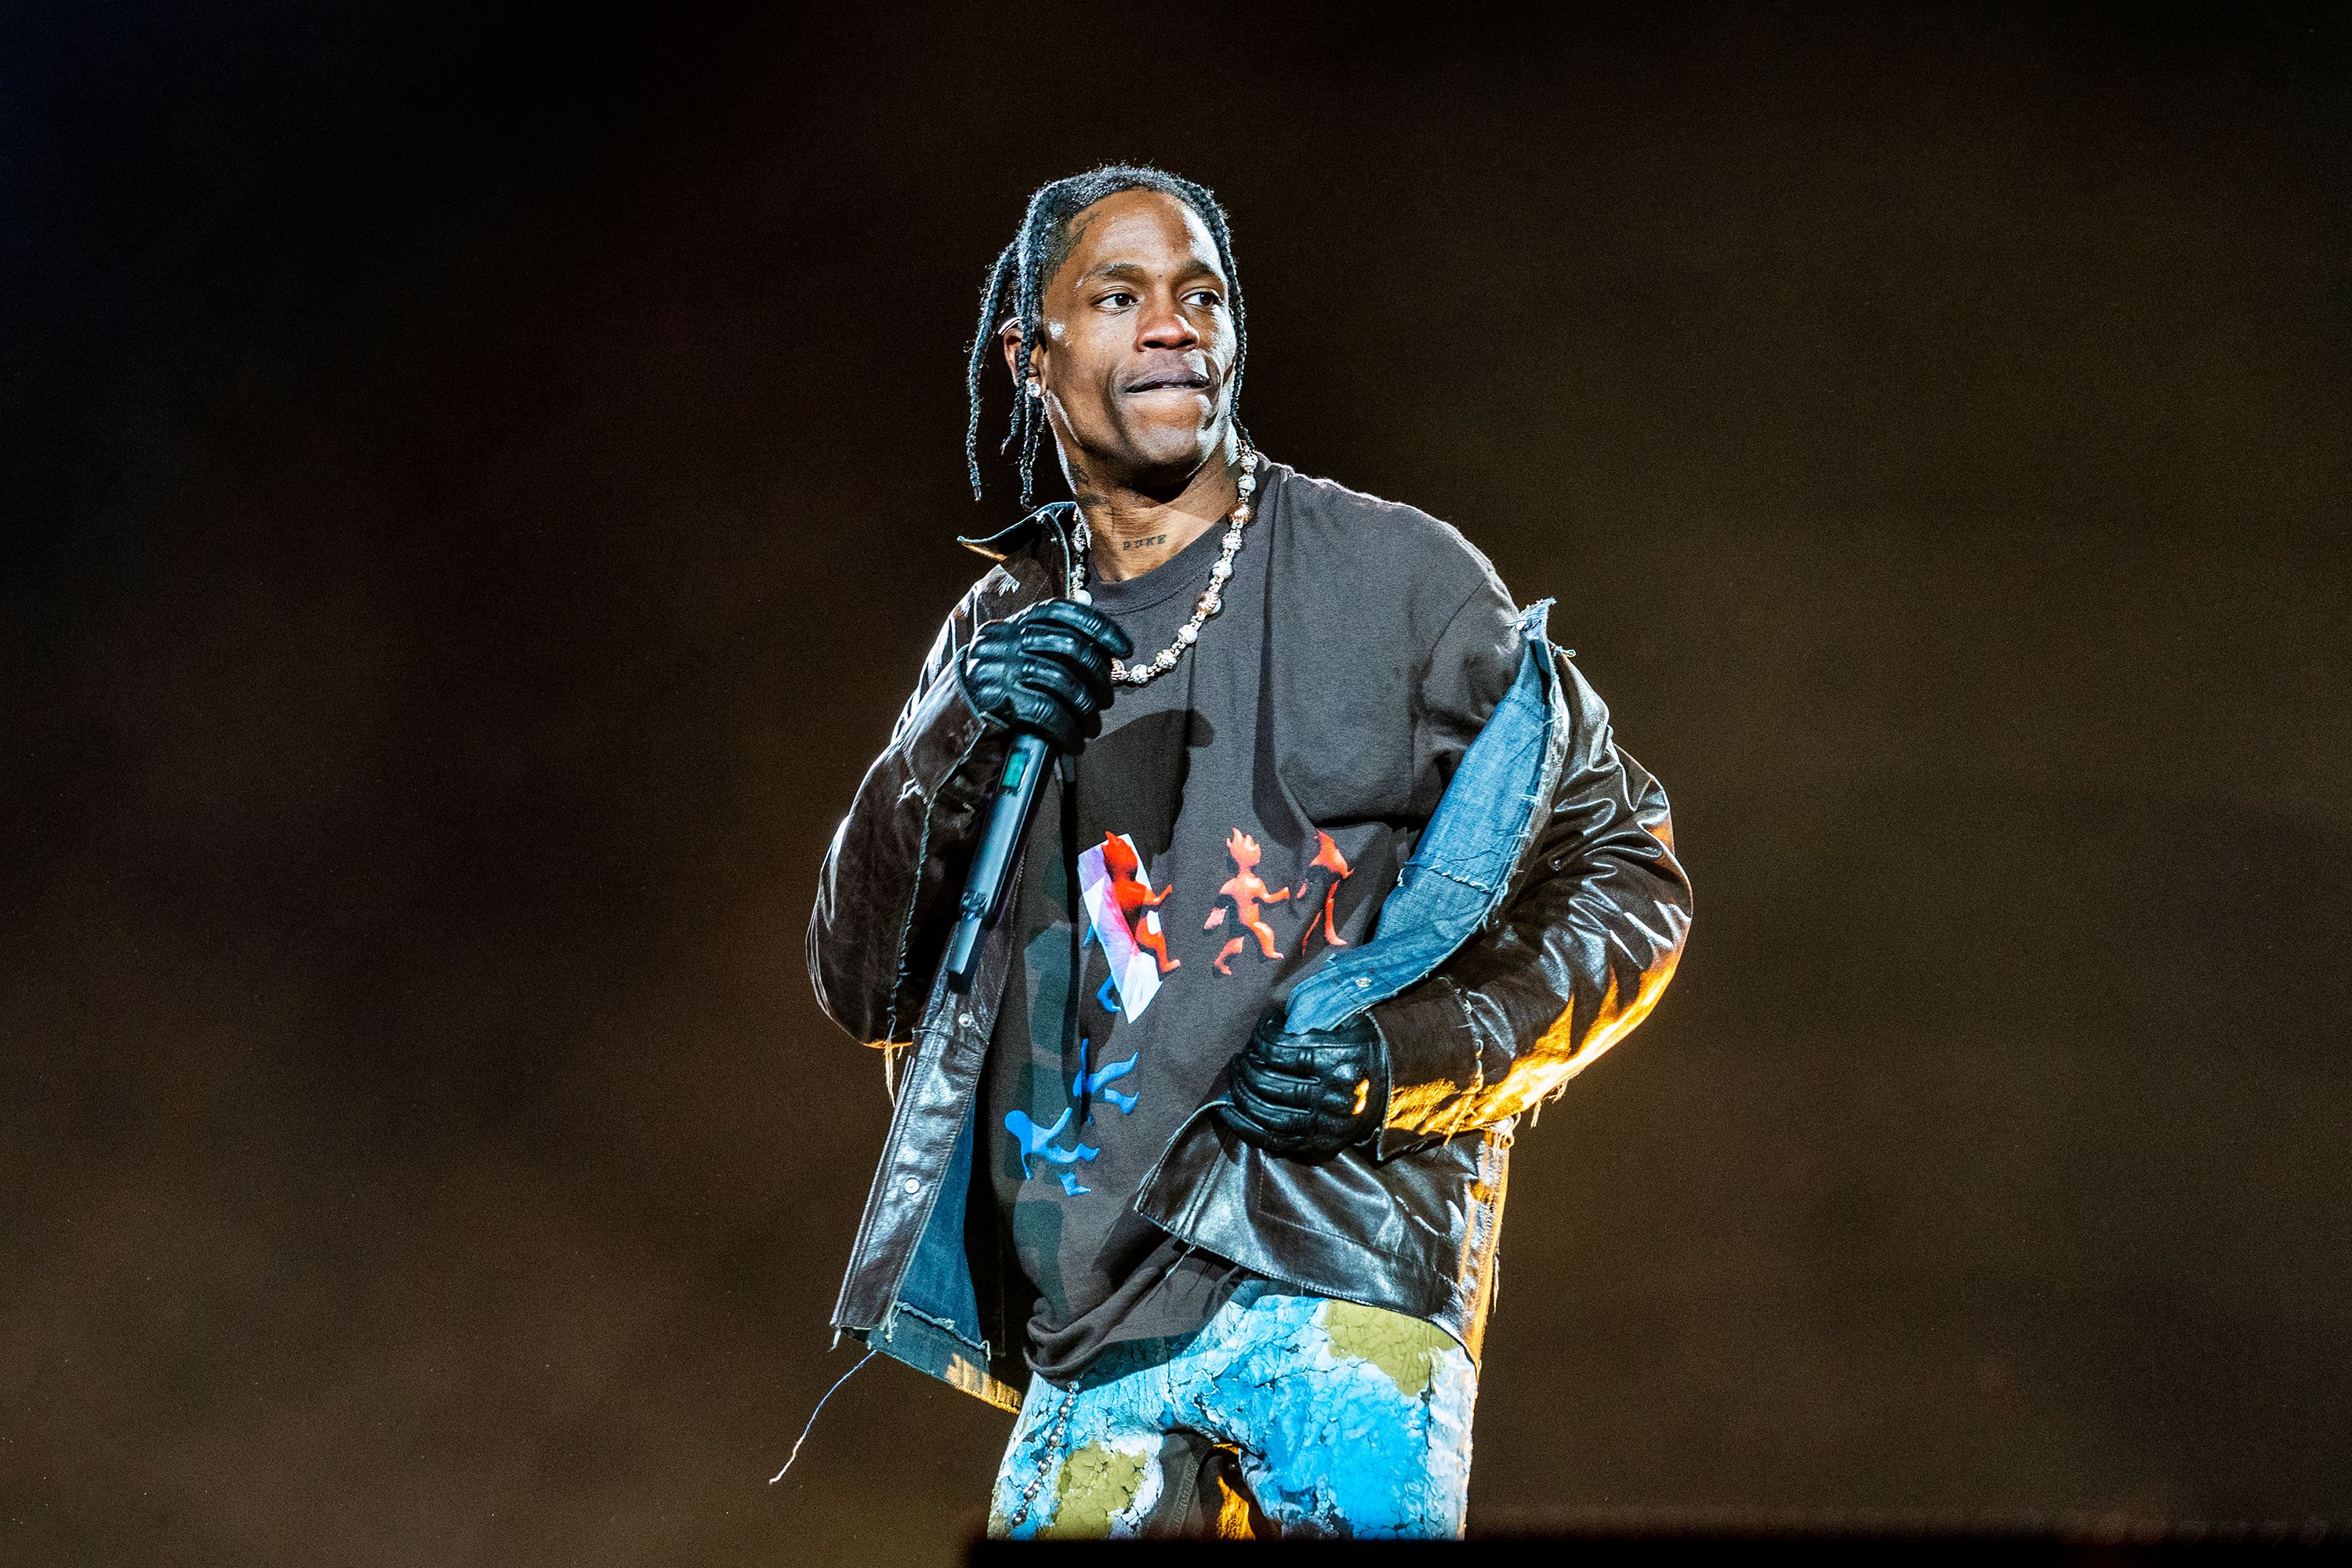 Travis Scott attends Astros game, previews new album for players